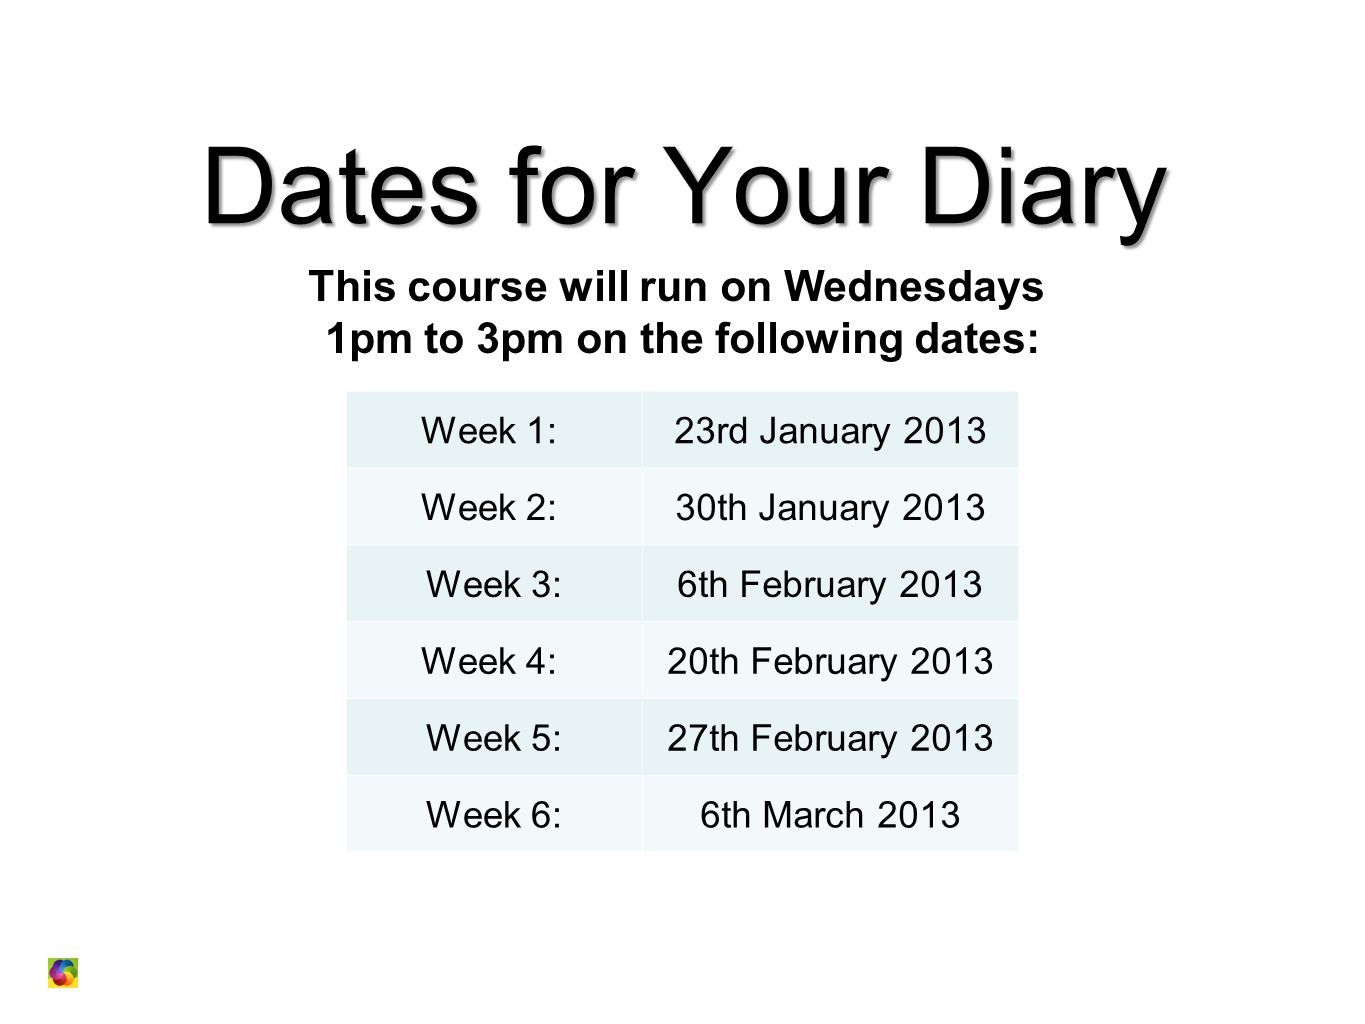 Dates for Your Diary This course will run on Wednesdays 1pm to 3pm on the following dates: : Week 1: 23rd January 2013 Week 2: 30th January 2013 Week 3:6th February 2013 Week 4: 20th February 2013 Week 5:27th February 2013 Week 6:6th March 2013